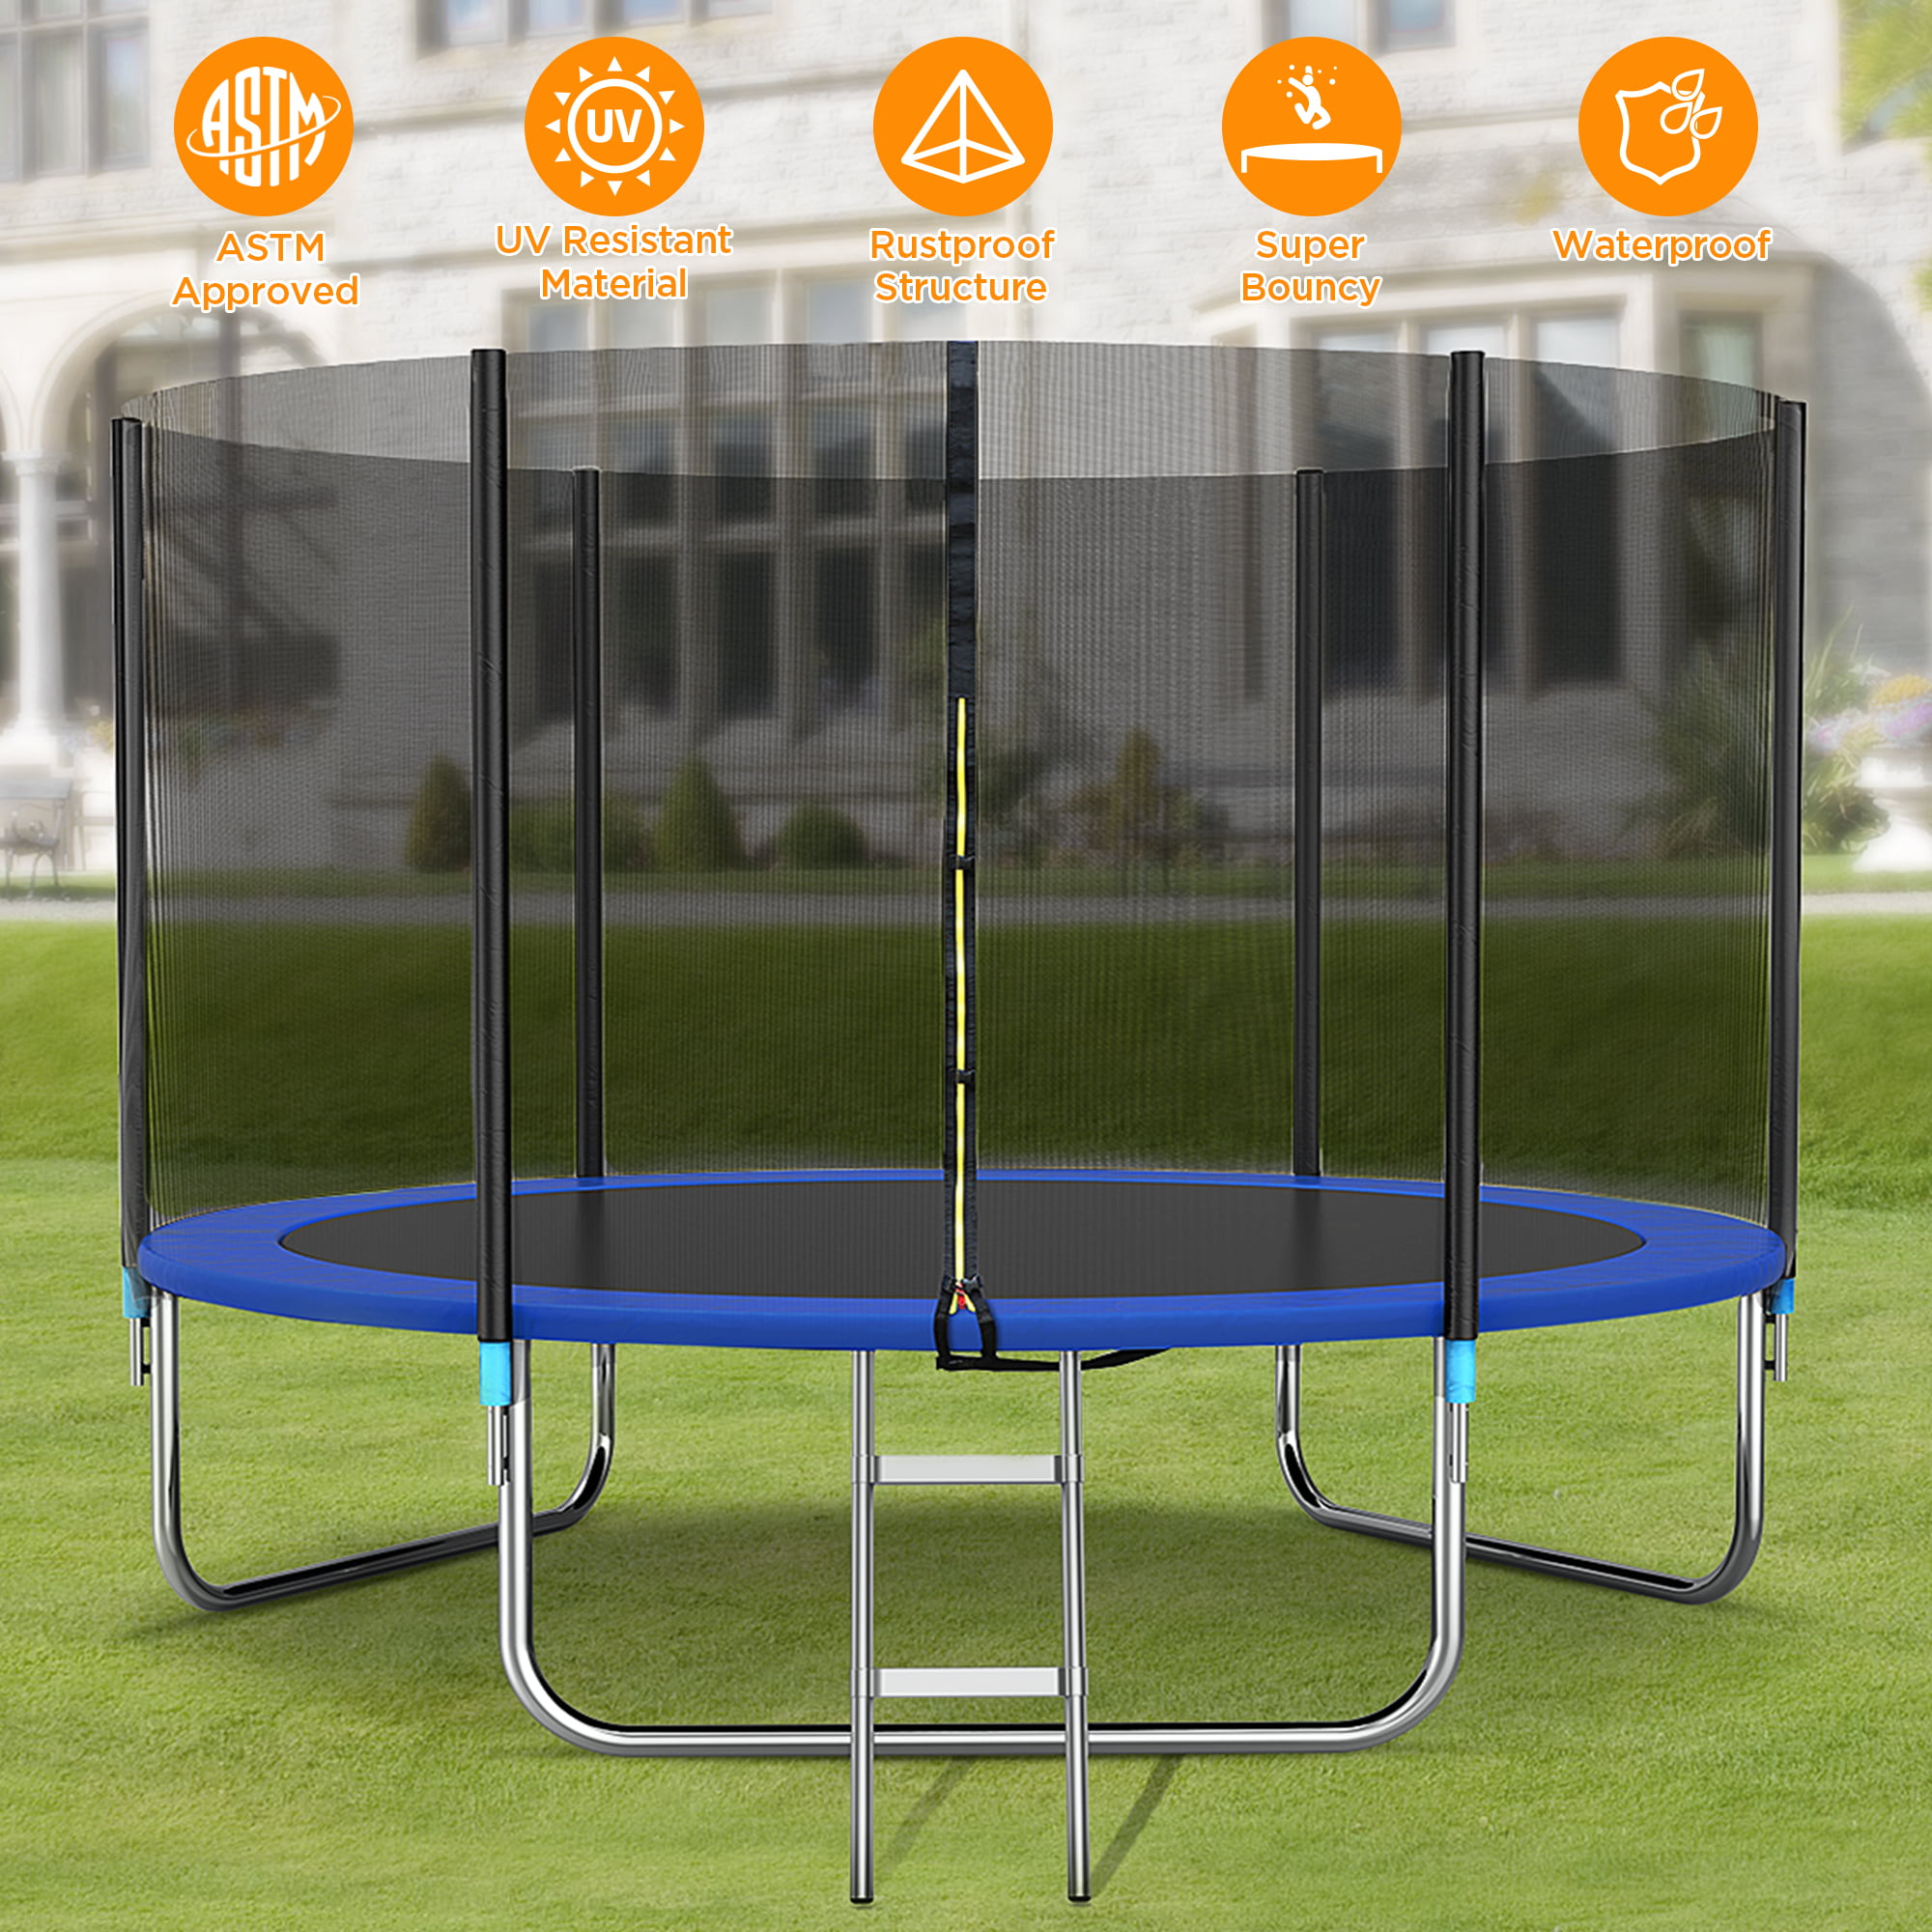 Trampoline Spring Pad,Waterproof Jump Mat & Ladder with Safety Enclosure Net Trampoline for Kids and Adult,10 12 15 FT Outdoor Trampoline Jump Recreational Trampolines 